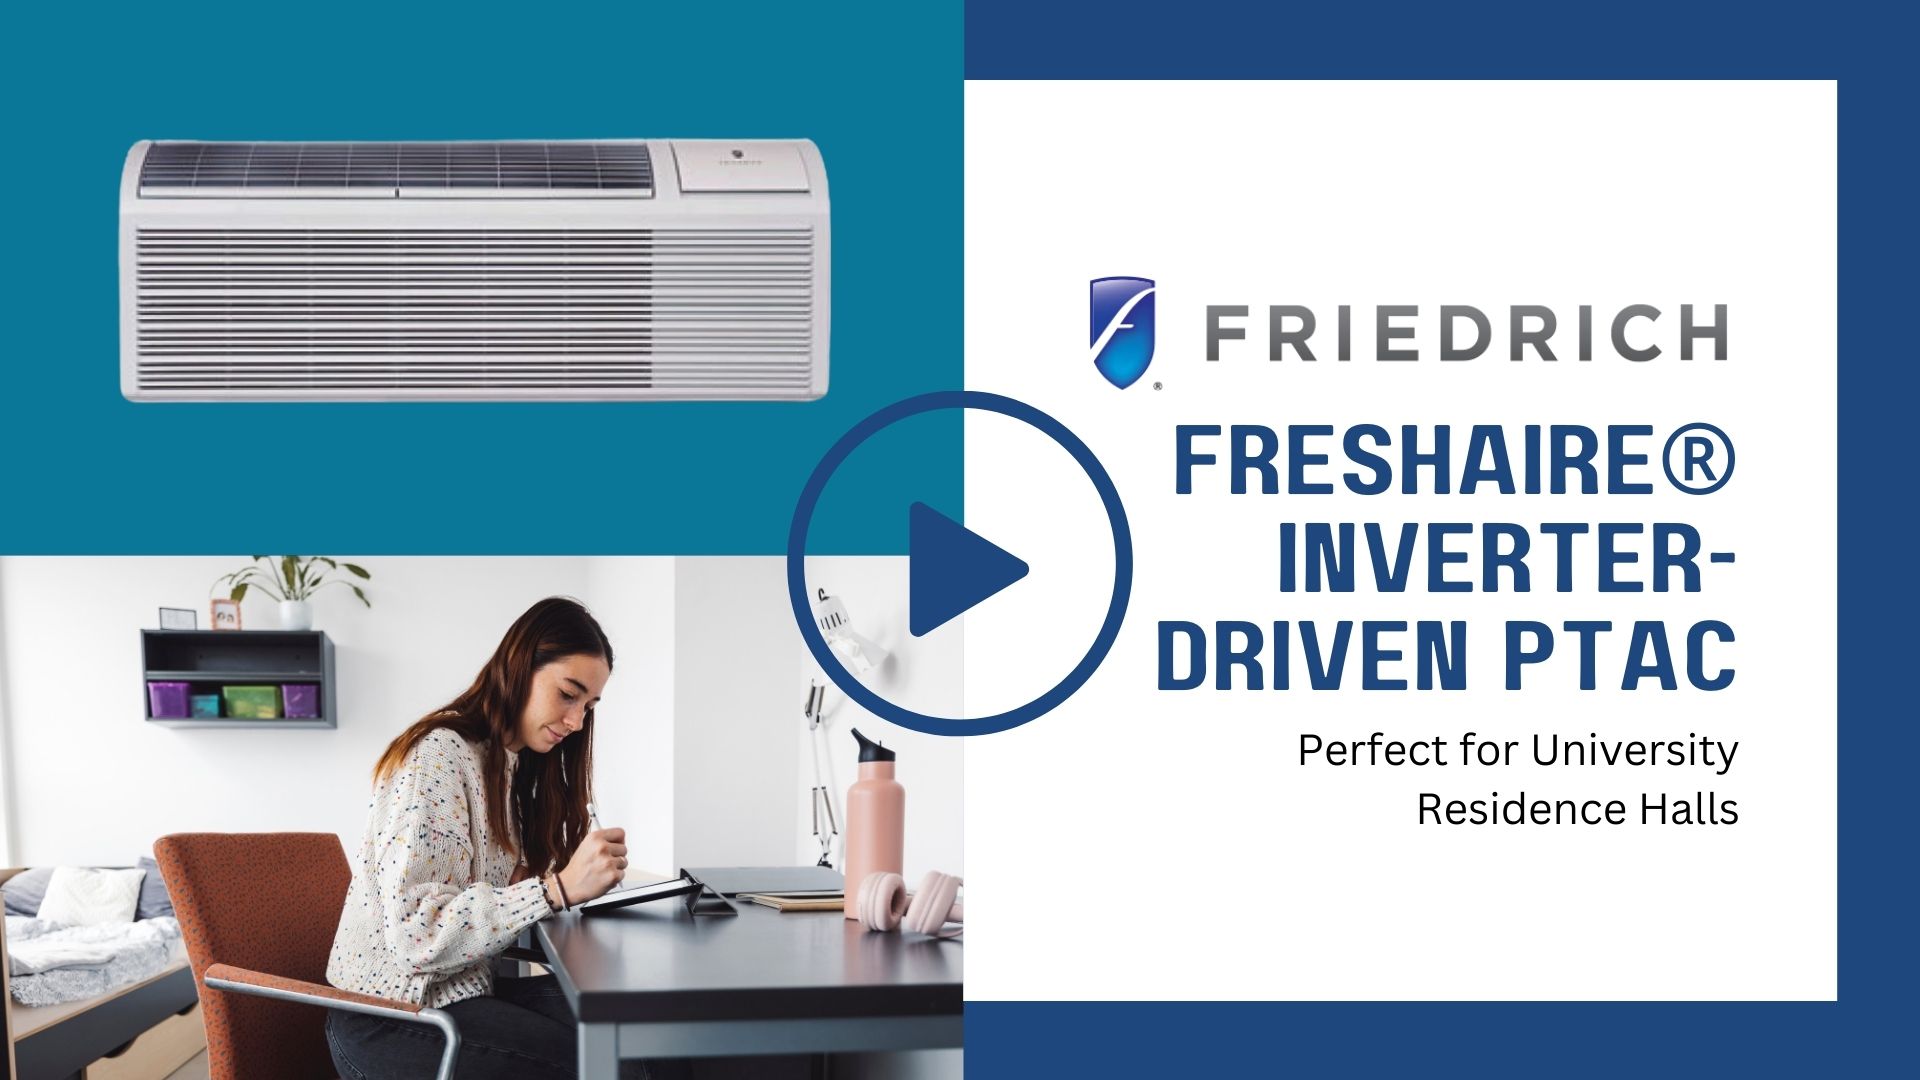 Image of a wall air conditioner unit in the top left corner. A woman sitting in a chair, holding a stylus and working on her ipad while wearing a multi-colored sweater and black jeans. The words "Friedrich Freshaire Inverter-Driven PTAC, Perfect for University Residence Halls" on the right side of the image.